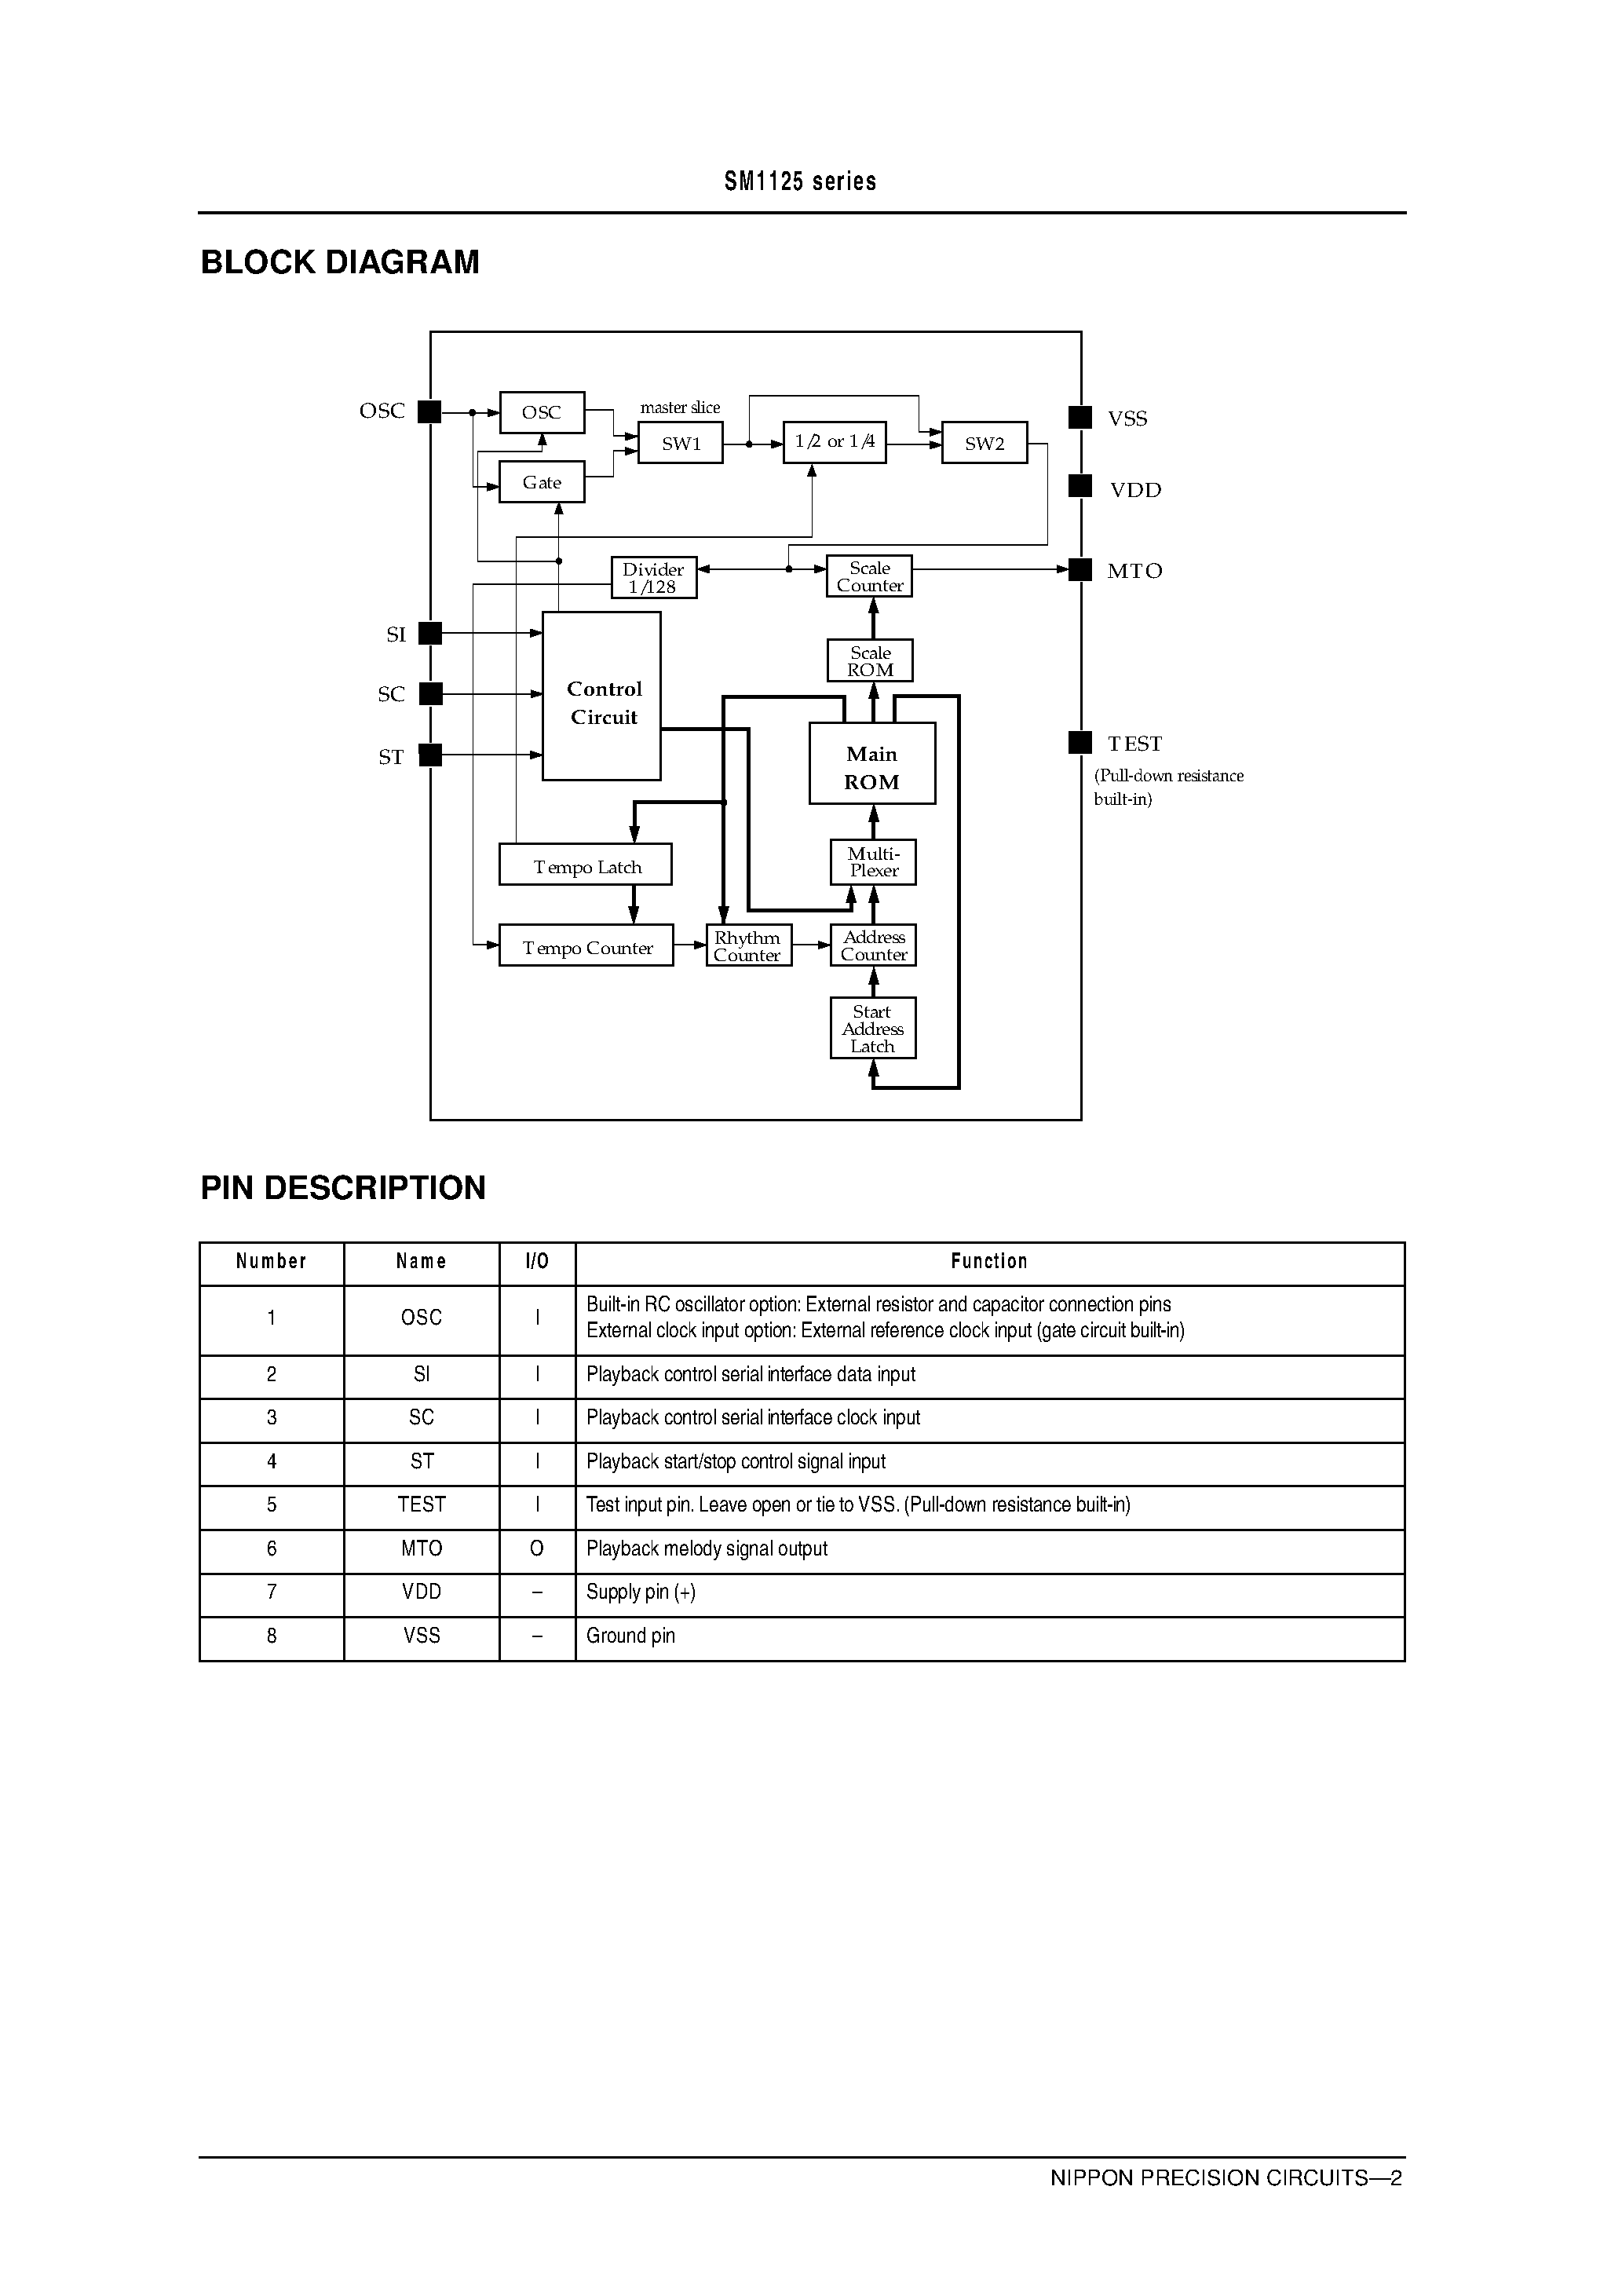 Даташит SM1125 - Multimelody IC for Pagers страница 2